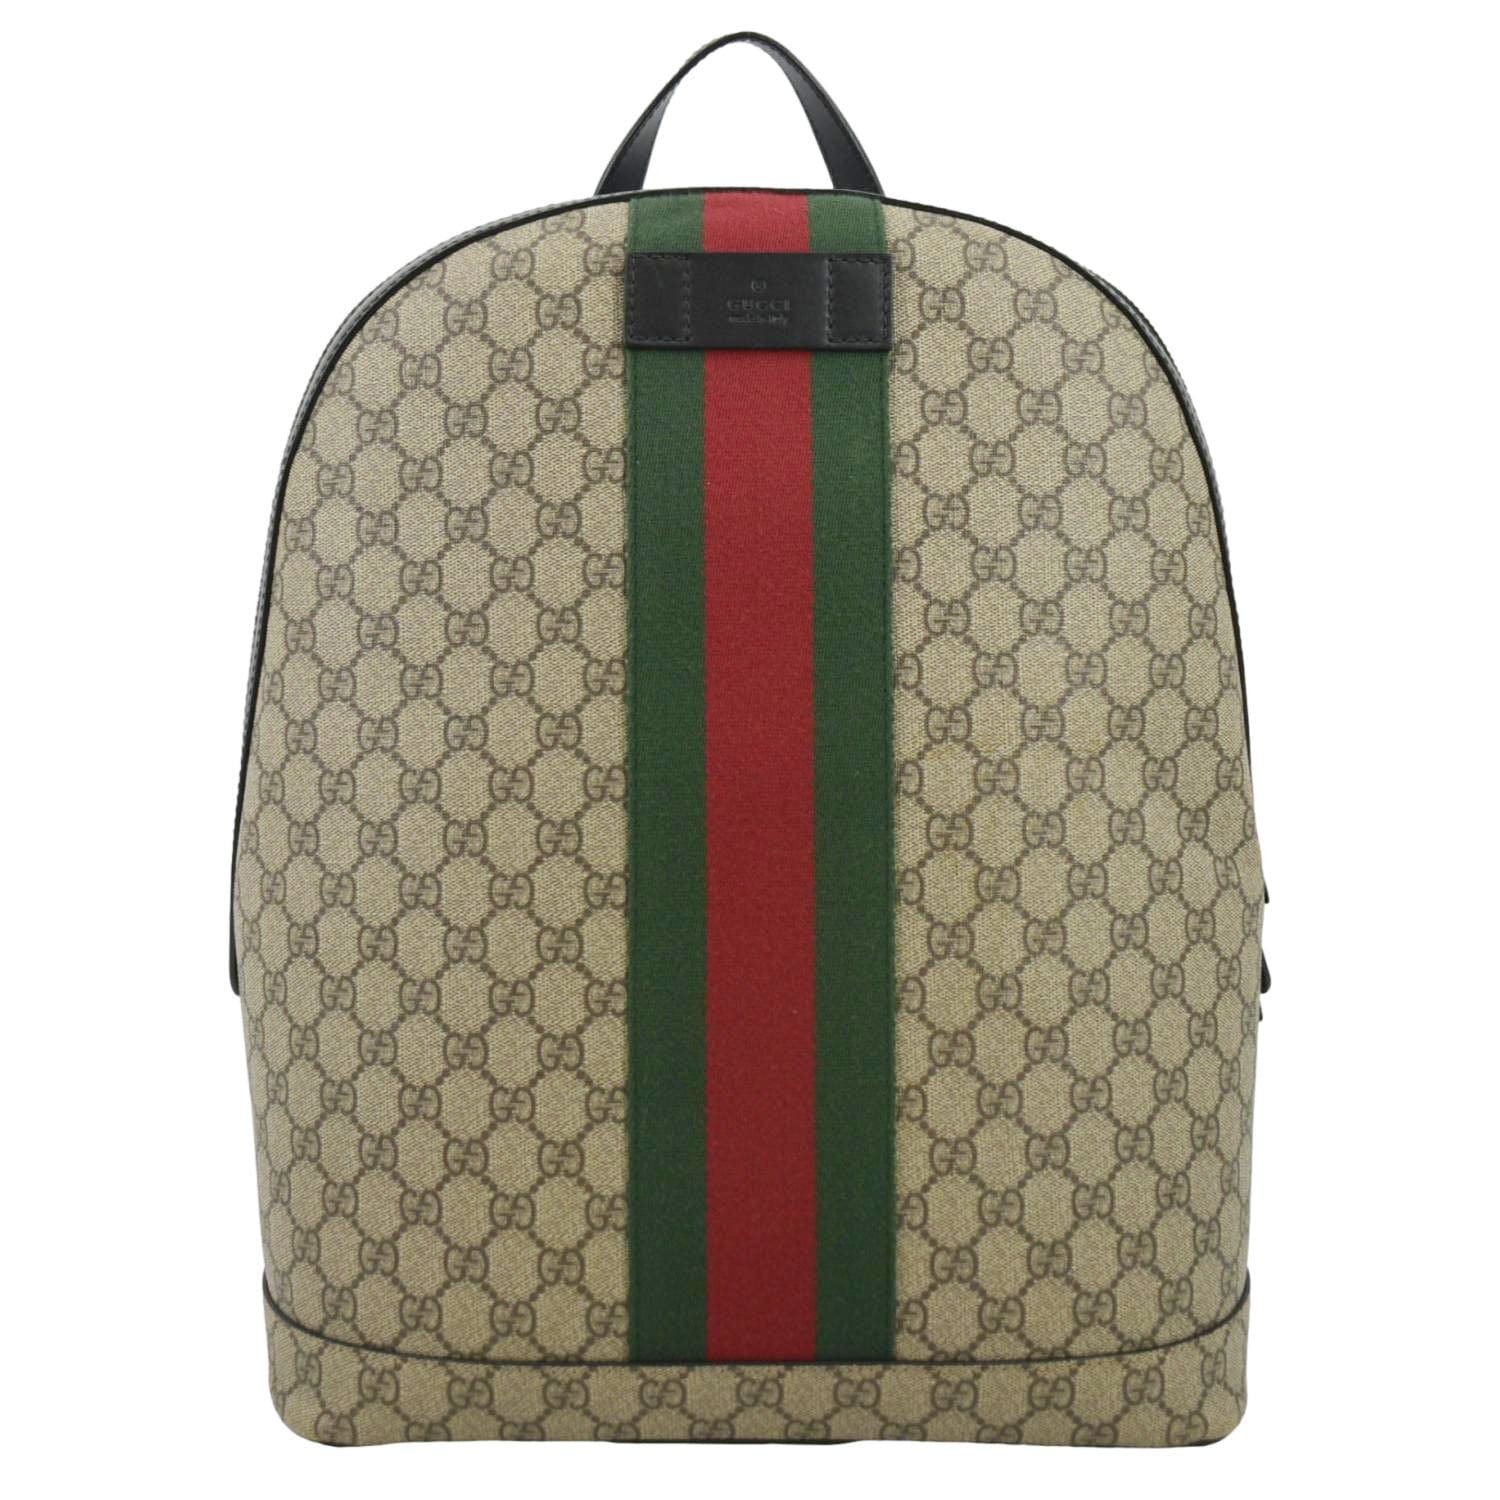 Free Gucci Backpack For Anyone Who Can Answer The Question